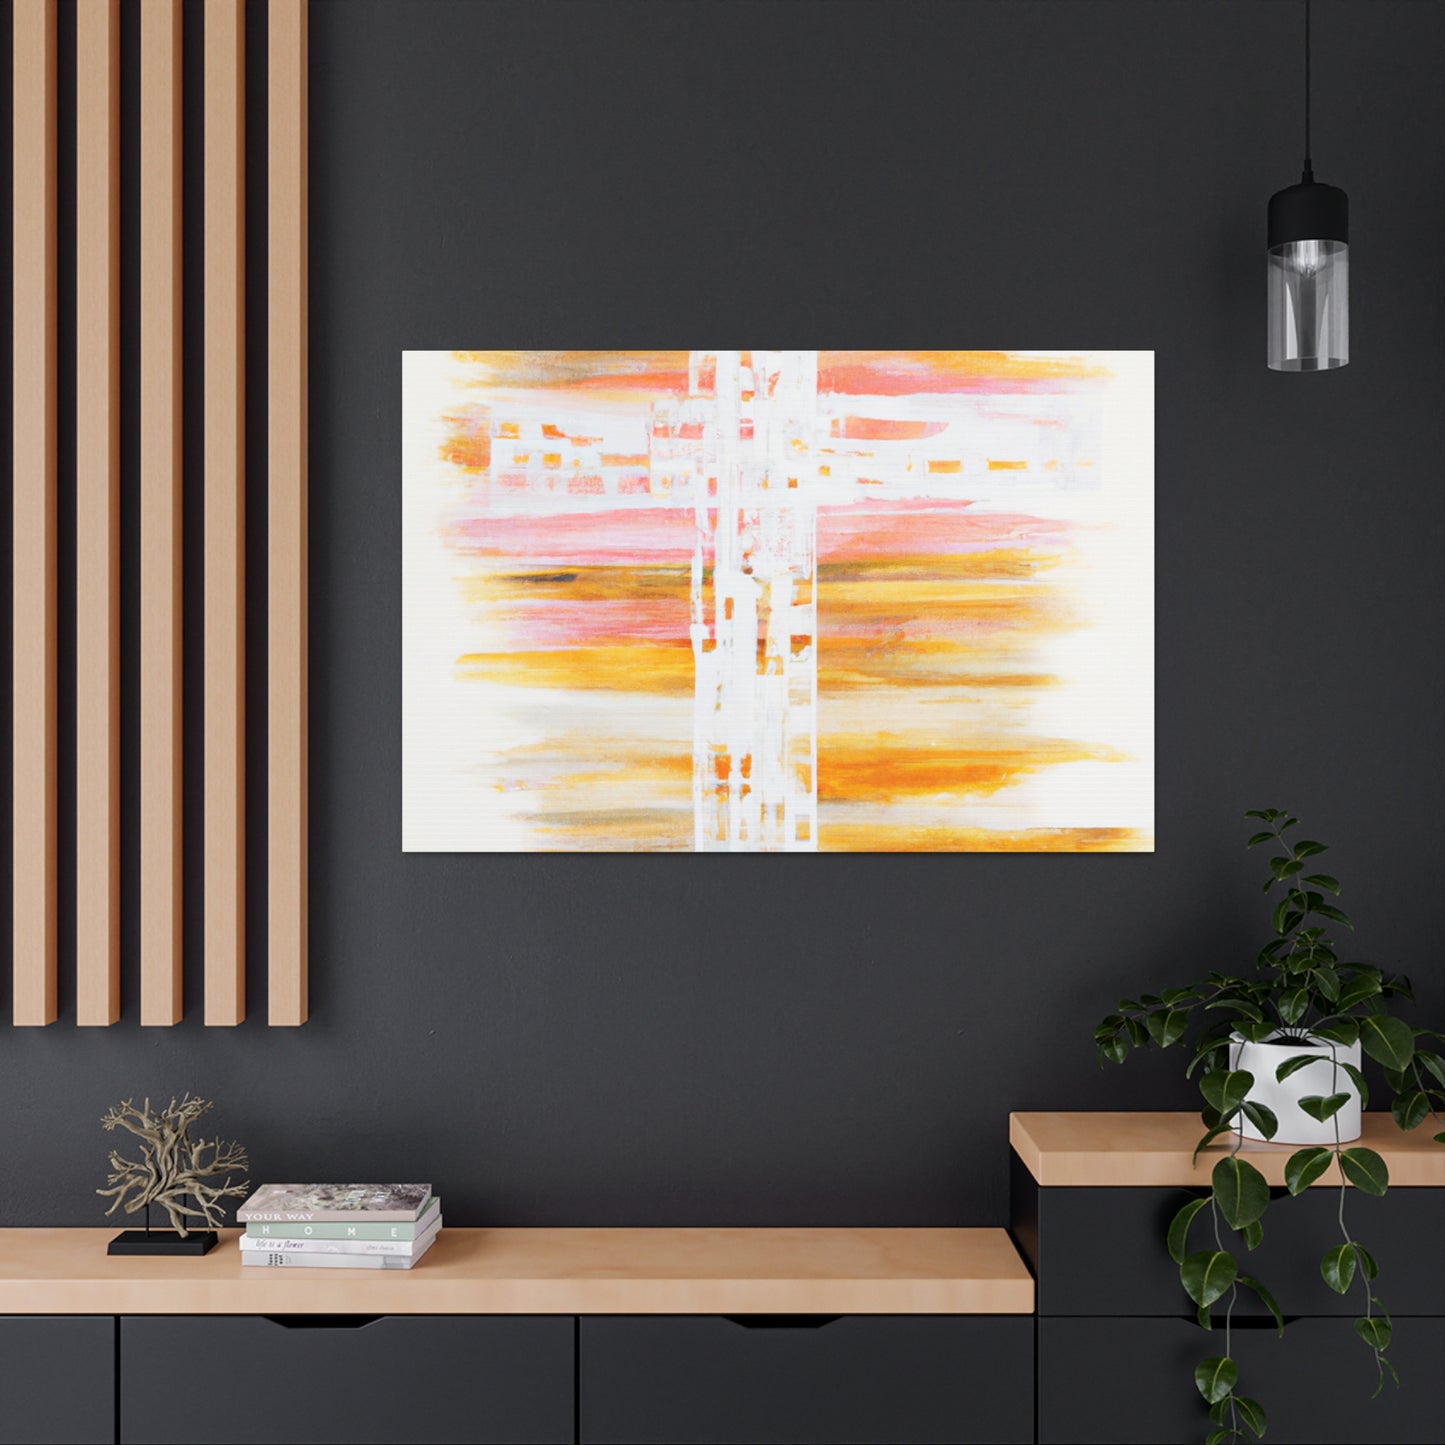 Hebrews 12:1 
"Therefore, since we are surrounded by such a great cloud of witnesses, let us throw off everything that hinders and the sin that so easily entangles. And let us run with perseverance the - Canvas Wall Art